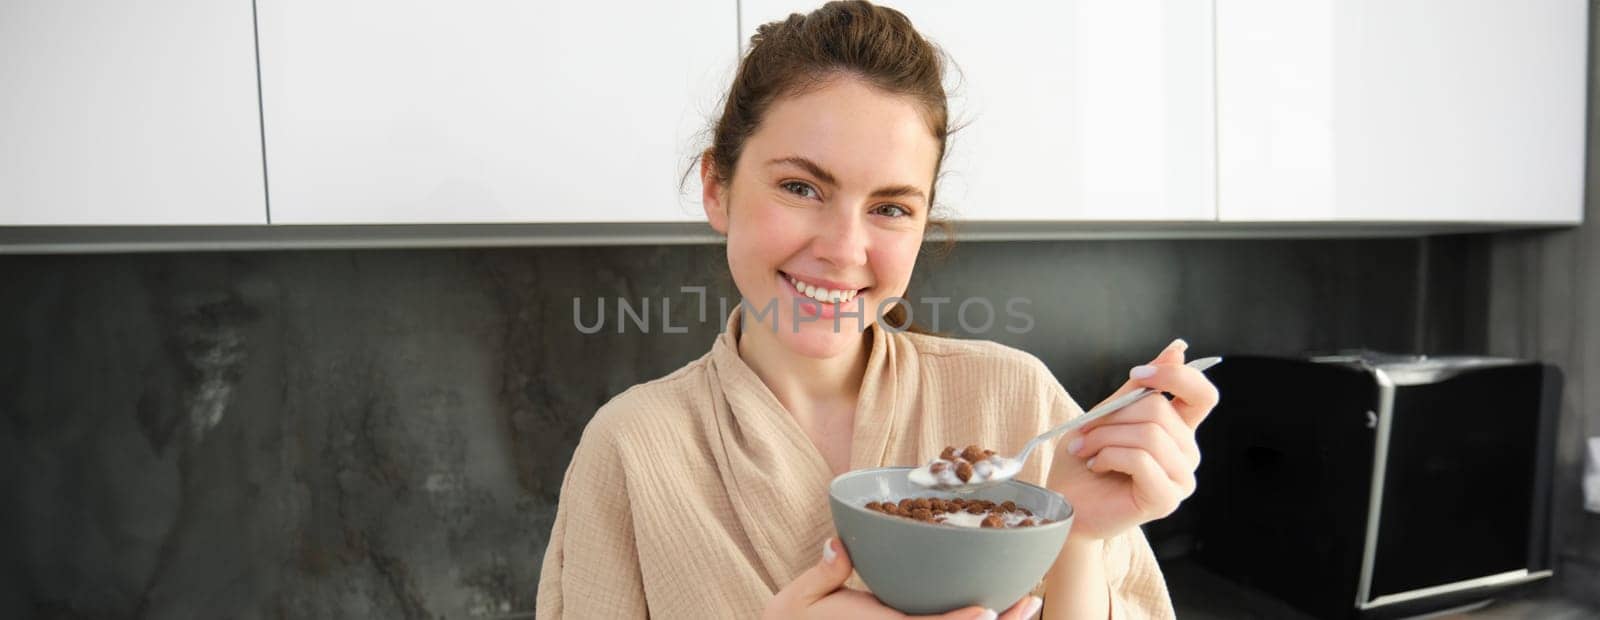 Gorgeous woman starts her day with cereals, eats breakfast and smiles, wears bathrobe, leans on kitchen worktop, starts her morning with quick meal.